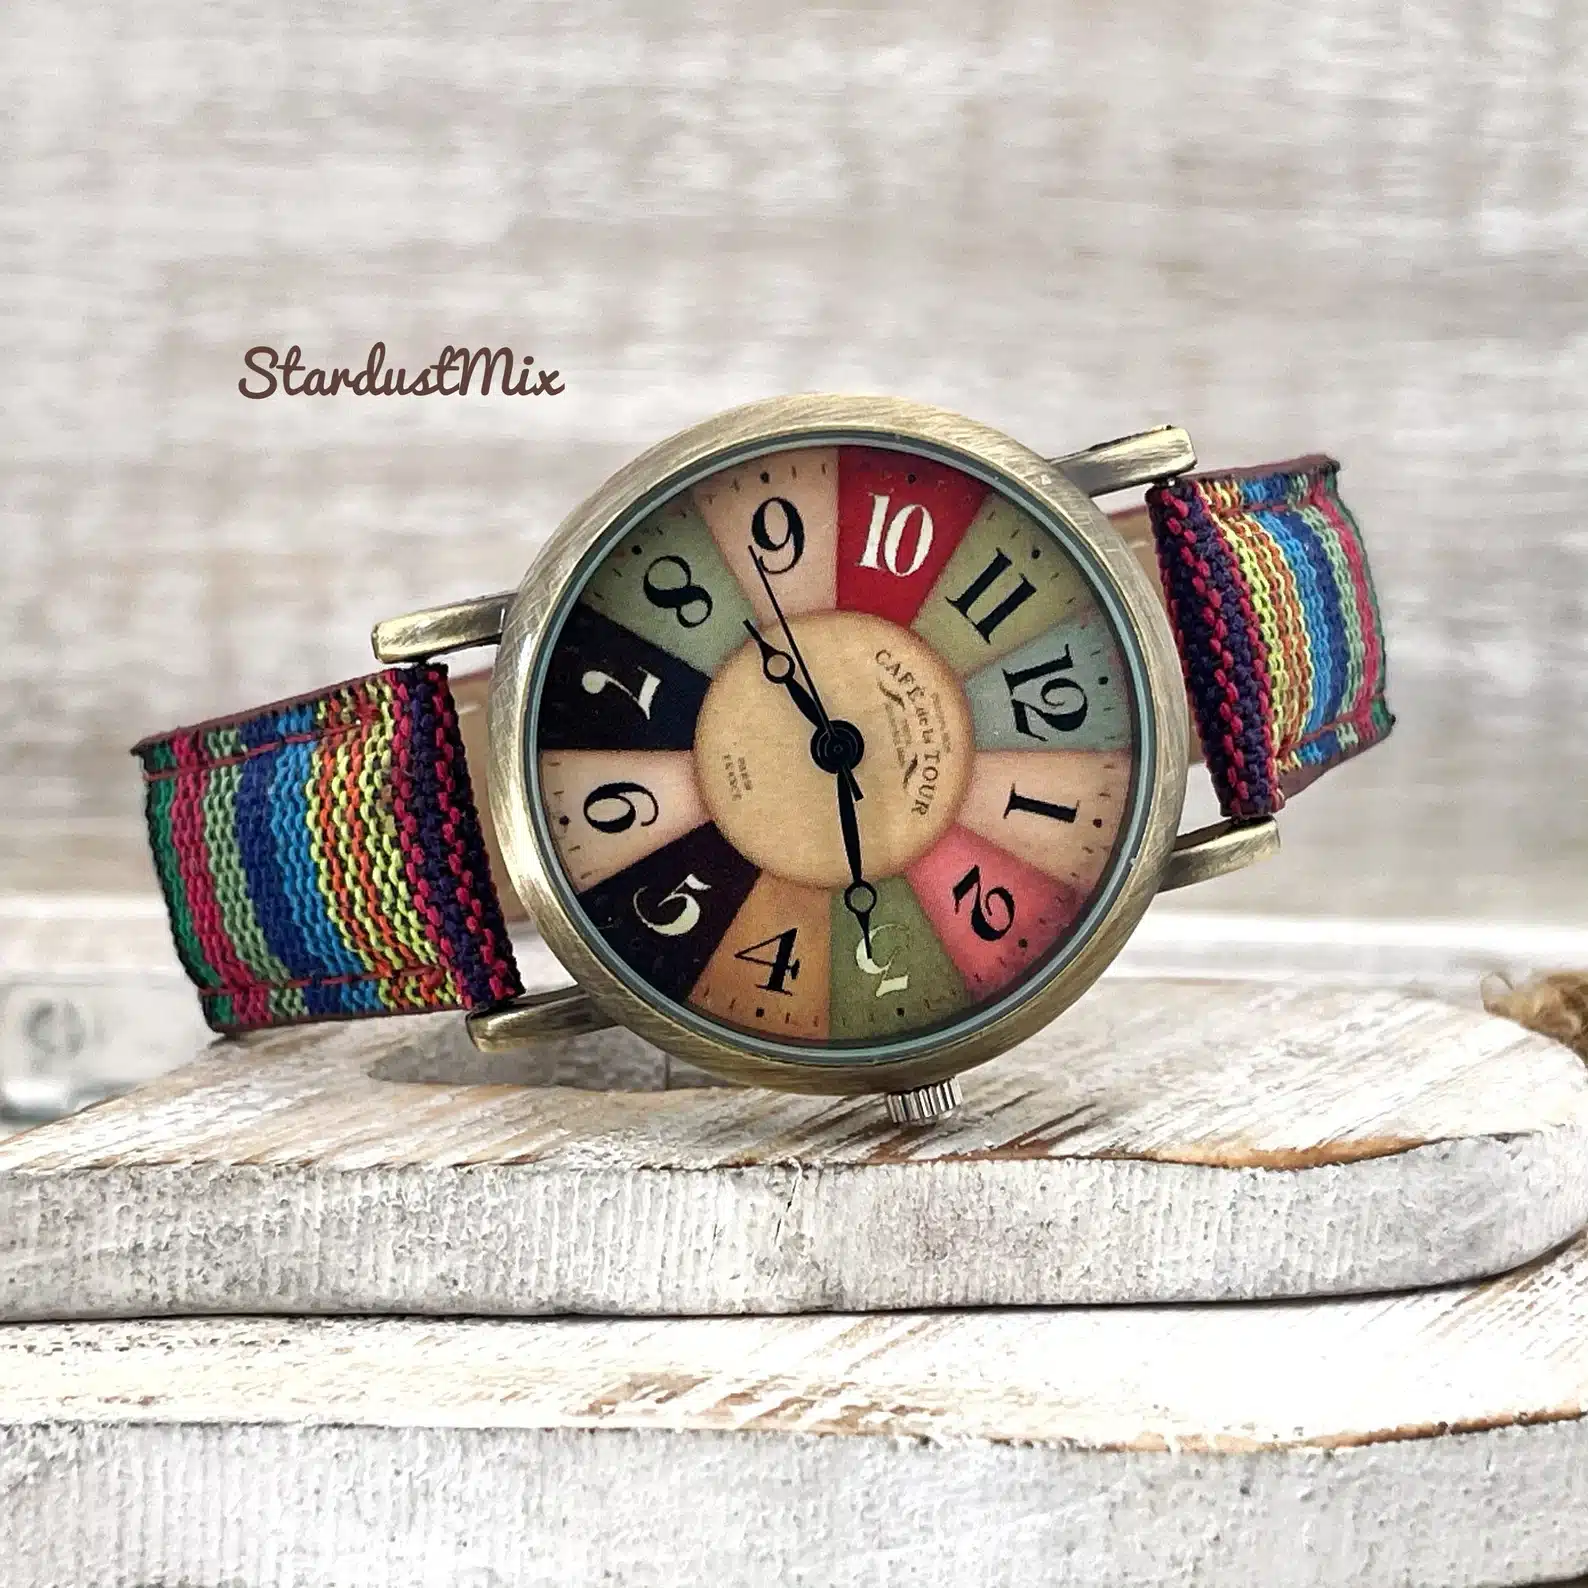 Watches for Women